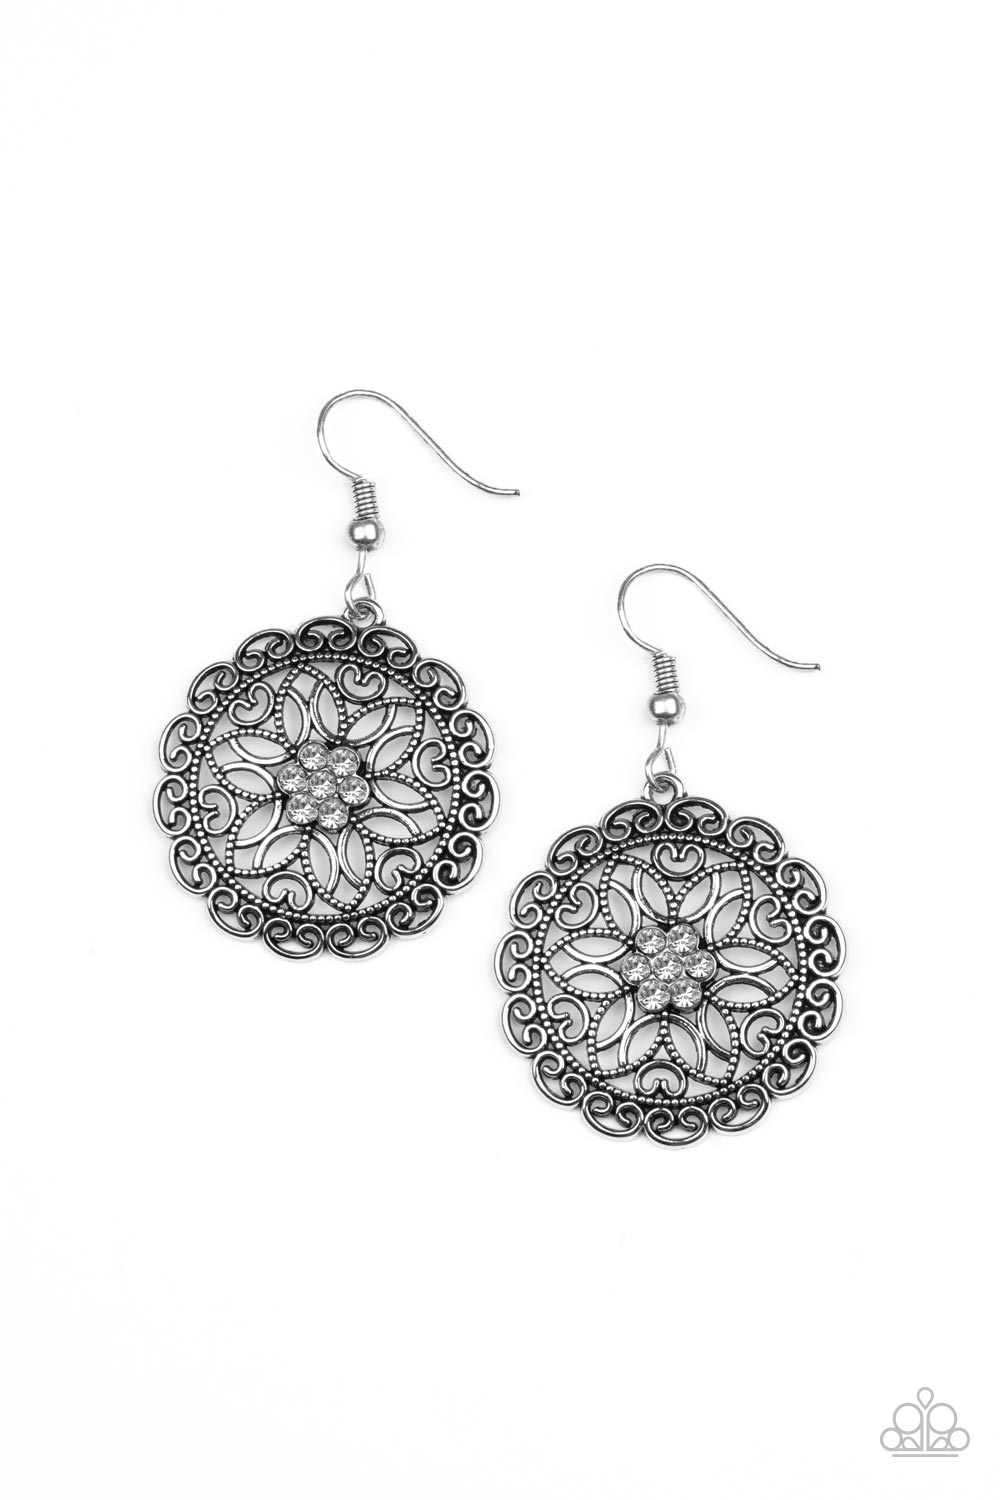 Flower Shop Sparkle - Silver Floral Earrings - Paparazzi Accessories - 
Overlapping silver petals fan out from a sparkly white rhinestone center inside a frilly ring of silver filigree, resulting in a whimsical floral frame. Earring attaches to a standard fishhook fitting. Sold as one pair of earrings.
